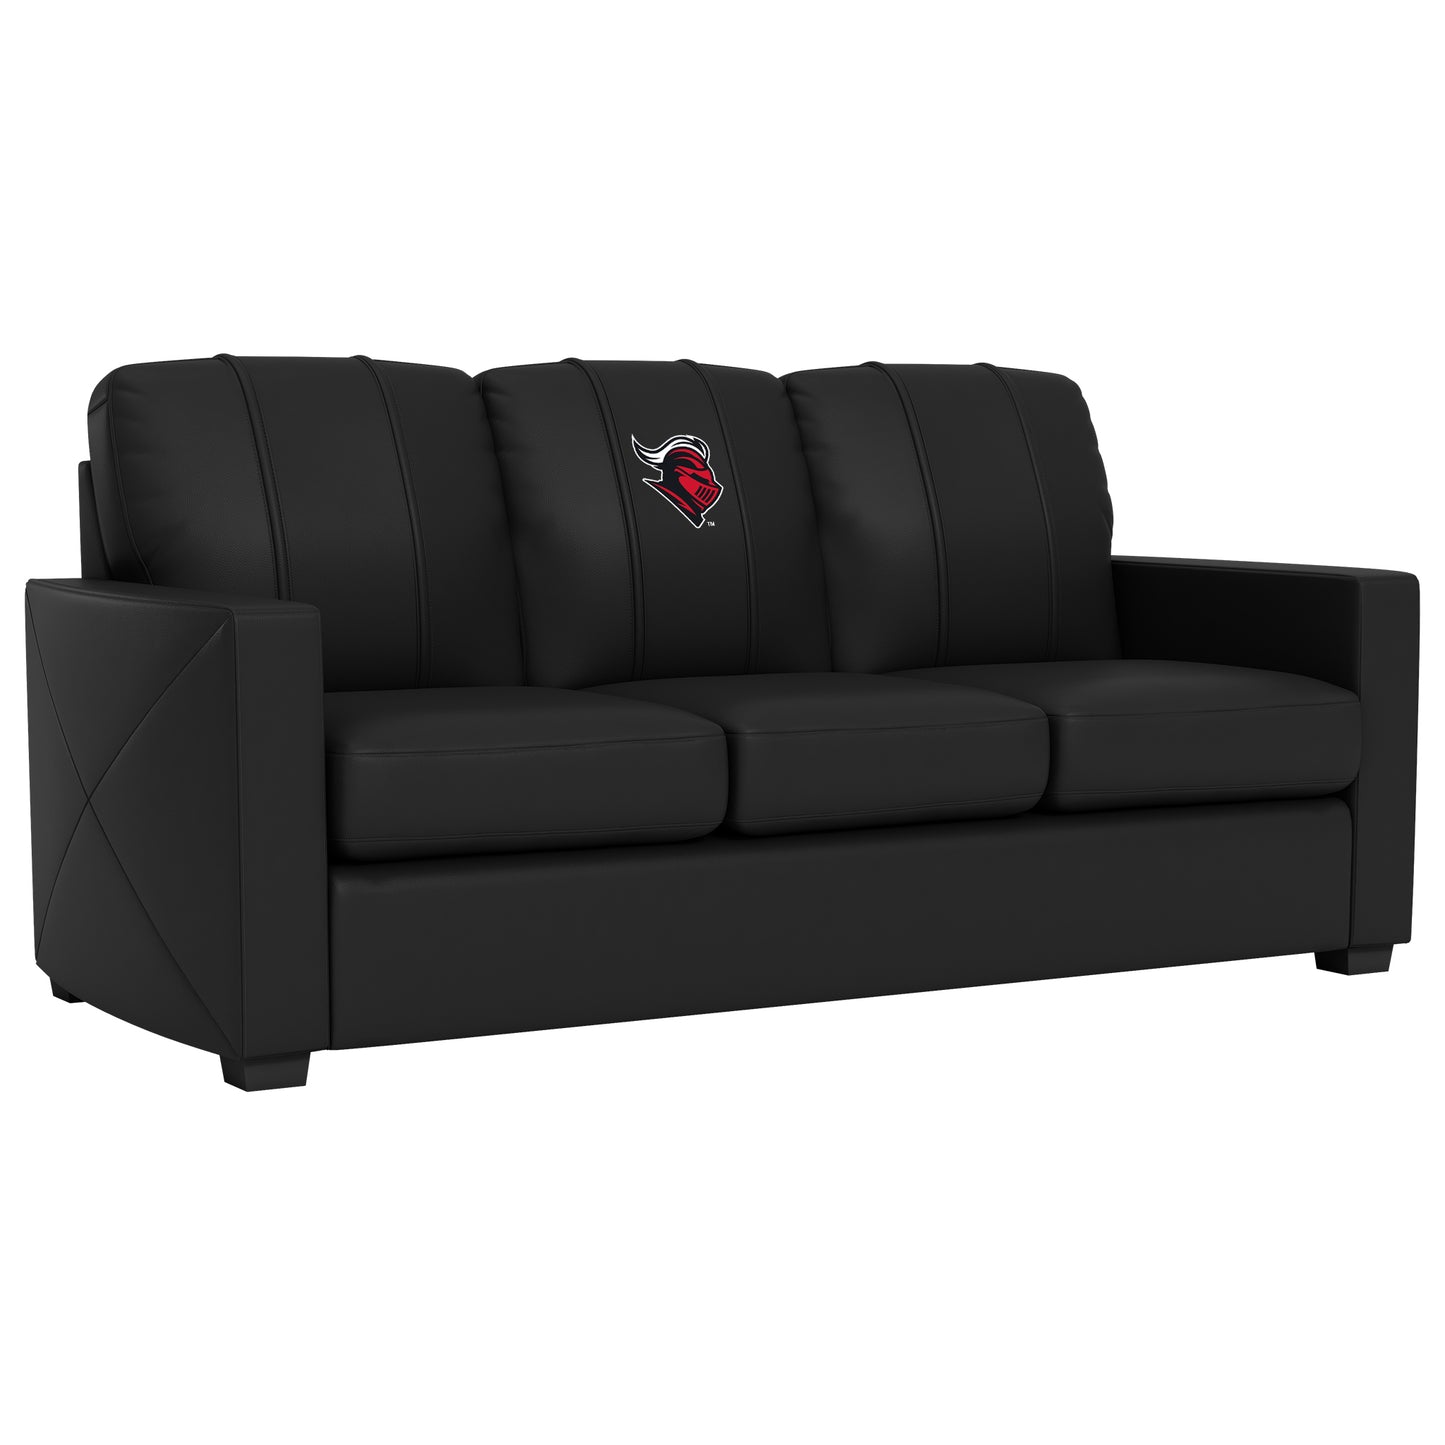 Silver Sofa with Rutgers Scarlet Knights Head Logo